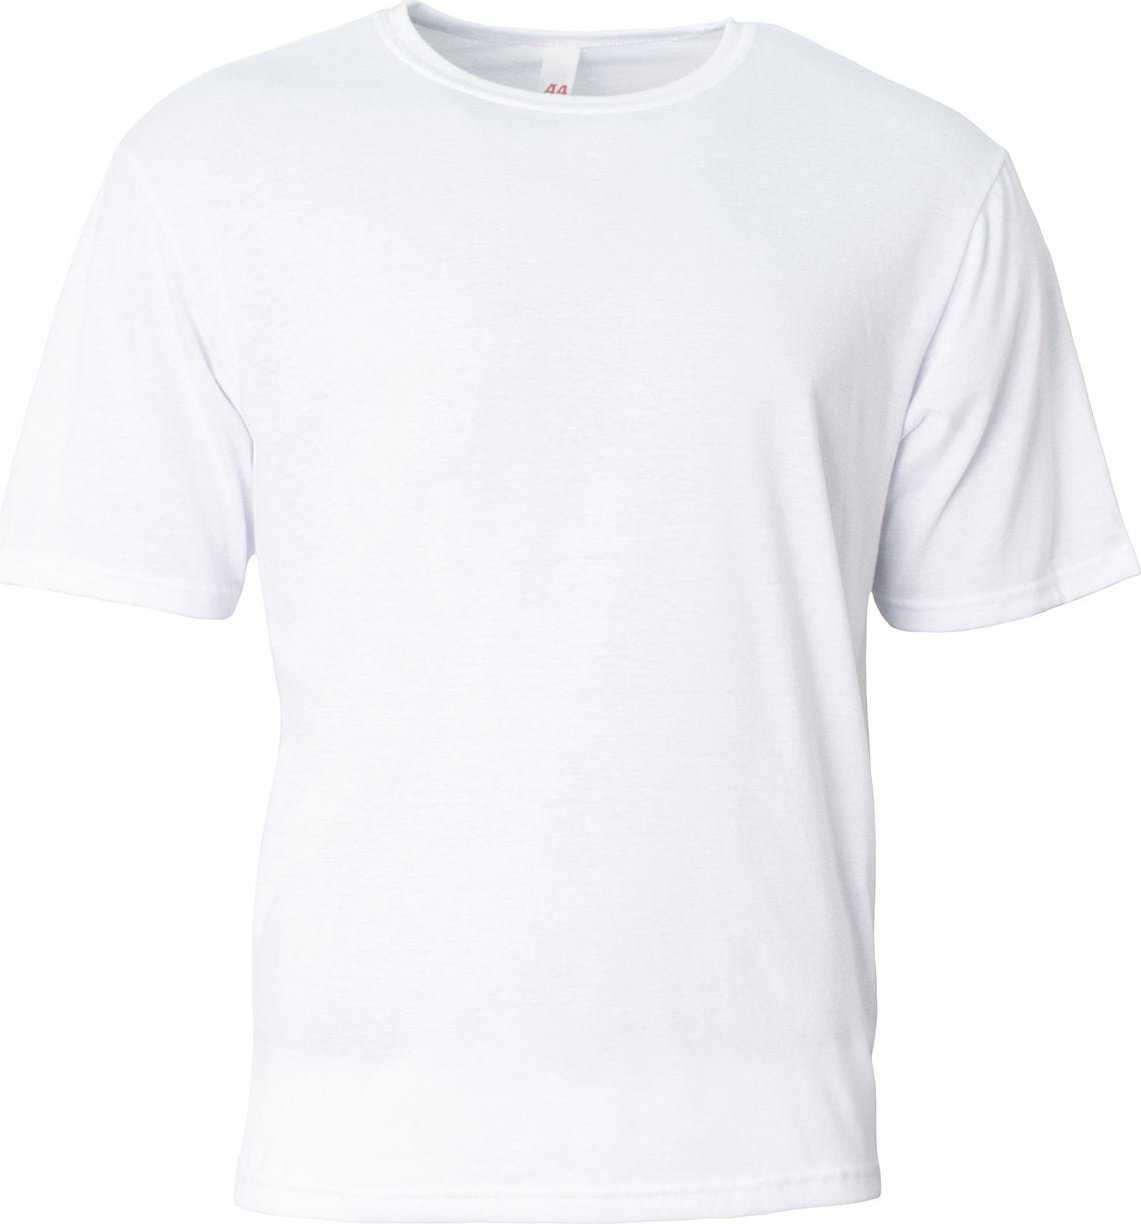 A4 NB3013 Youth Softek T-Shirt - WHITE - HIT a Double - 2